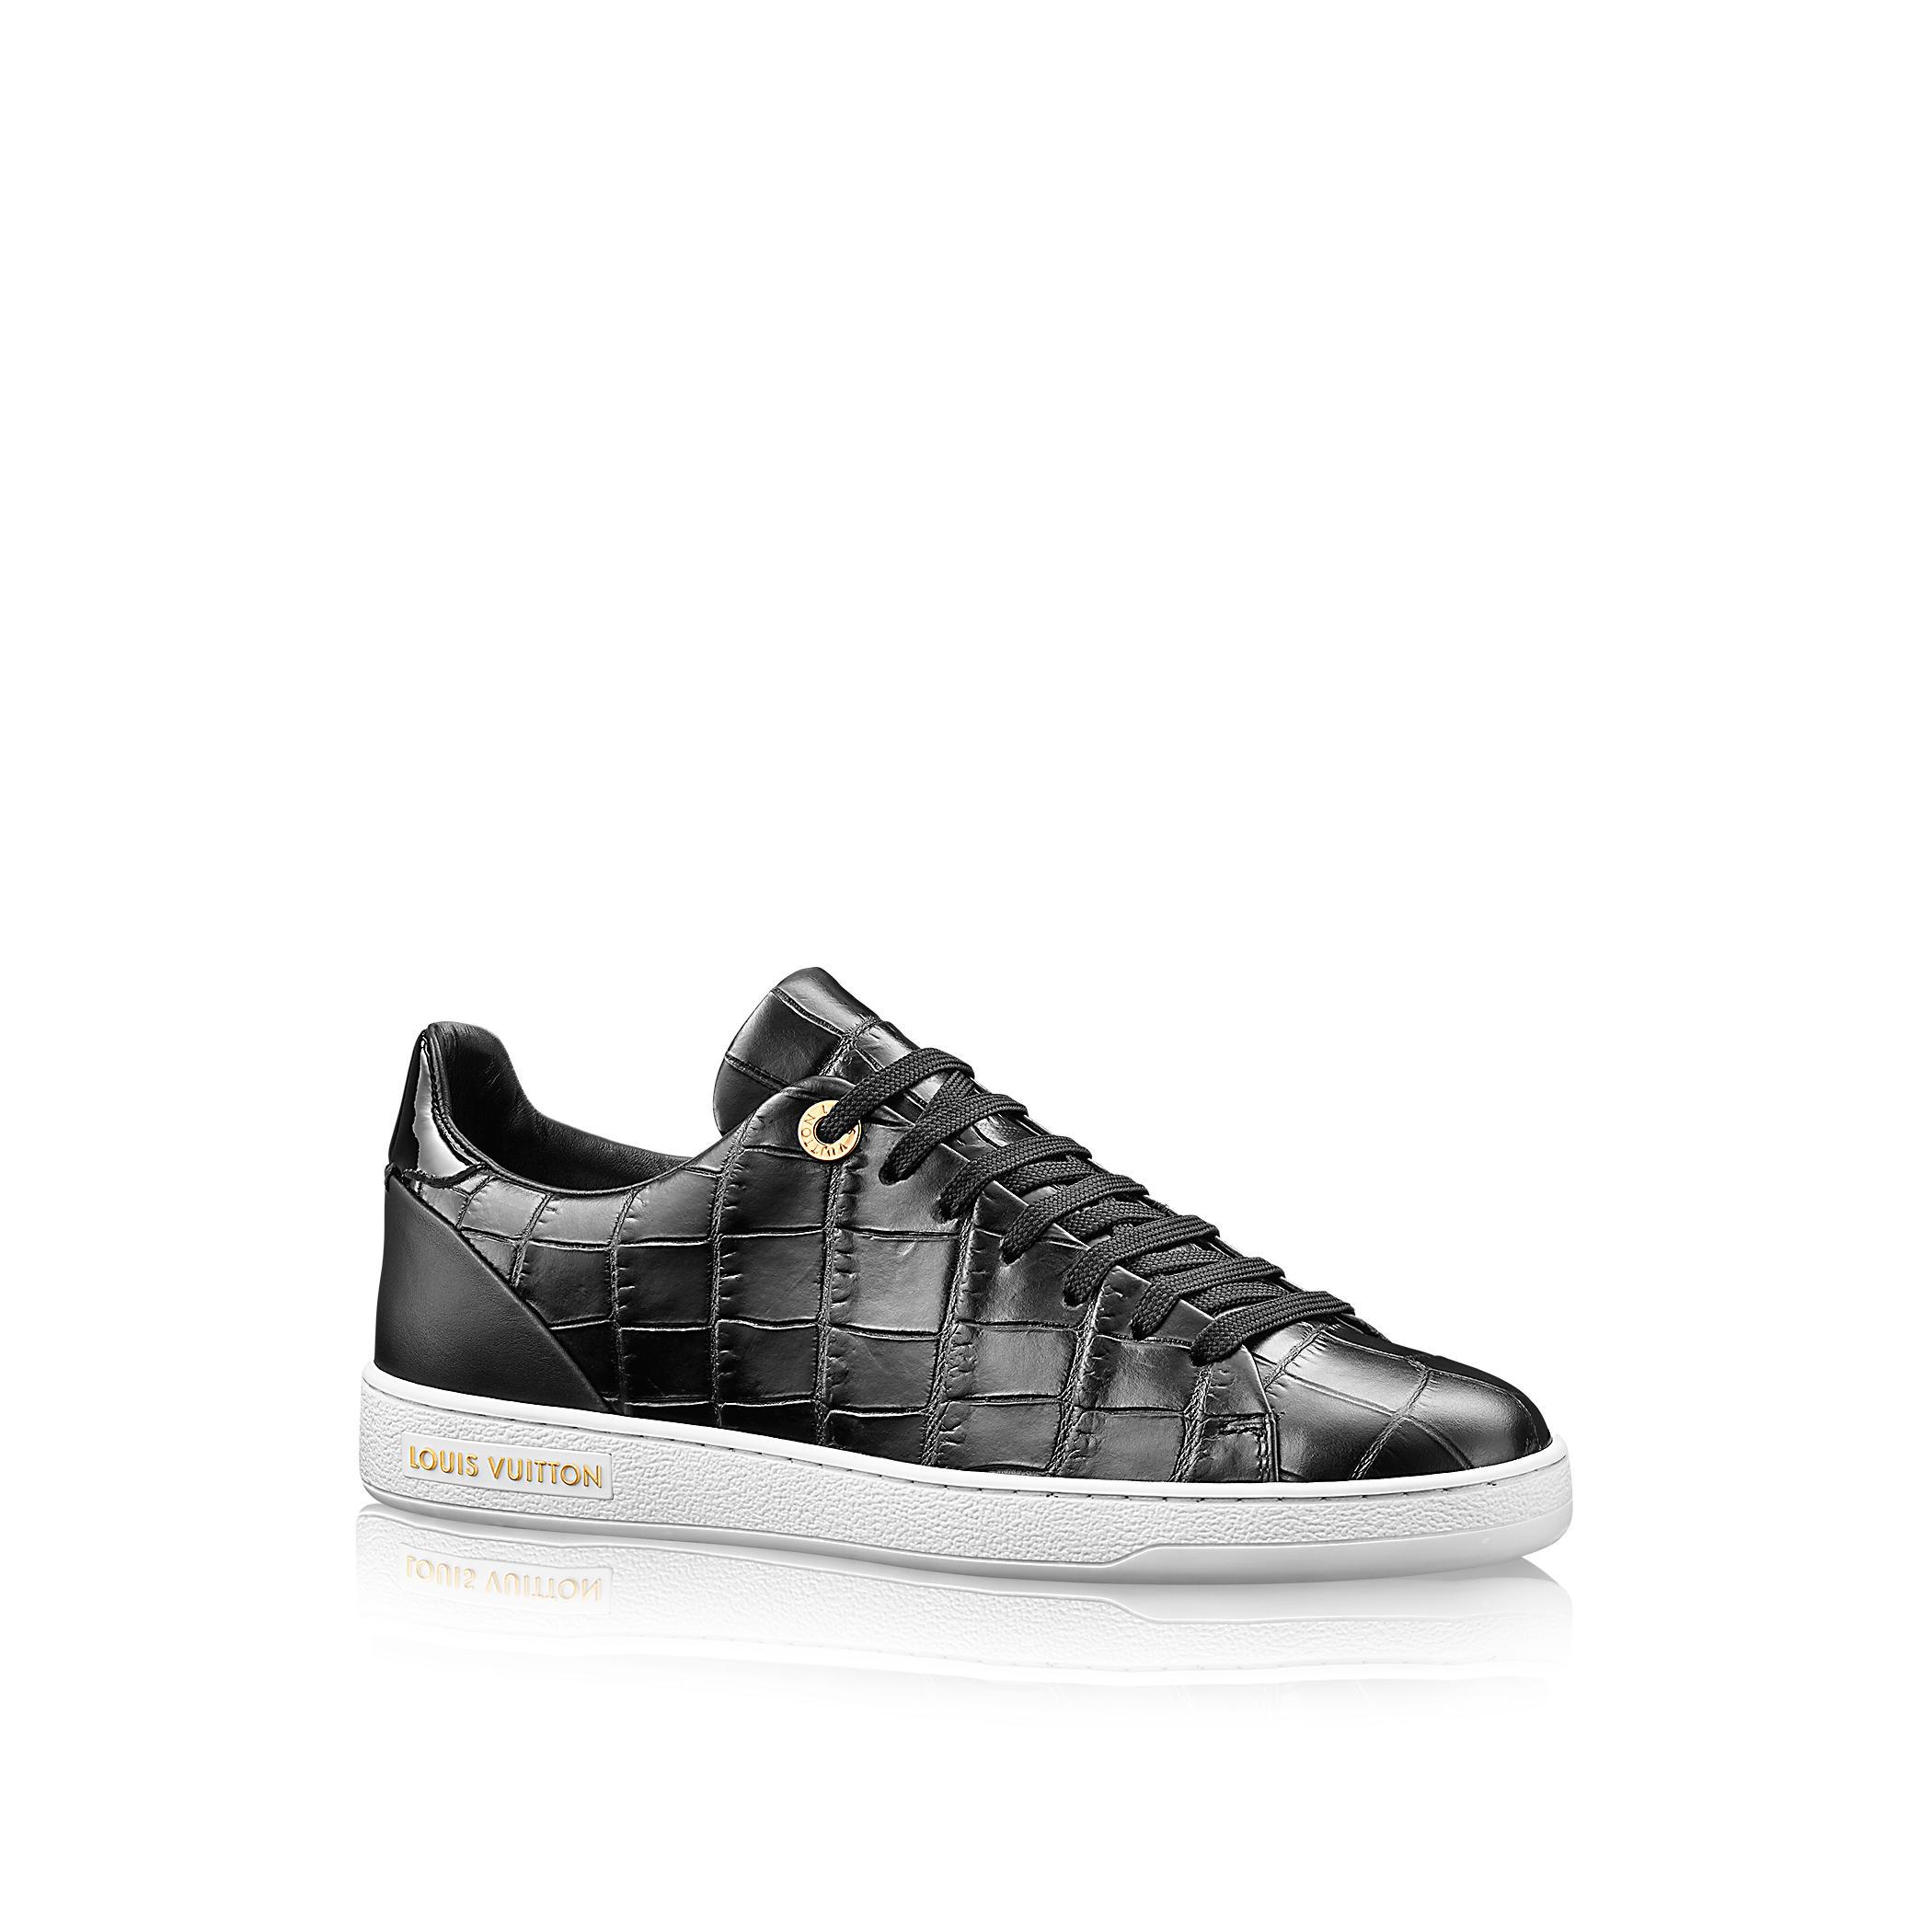 Louis vuitton Frontrow Sneaker in White | Lyst